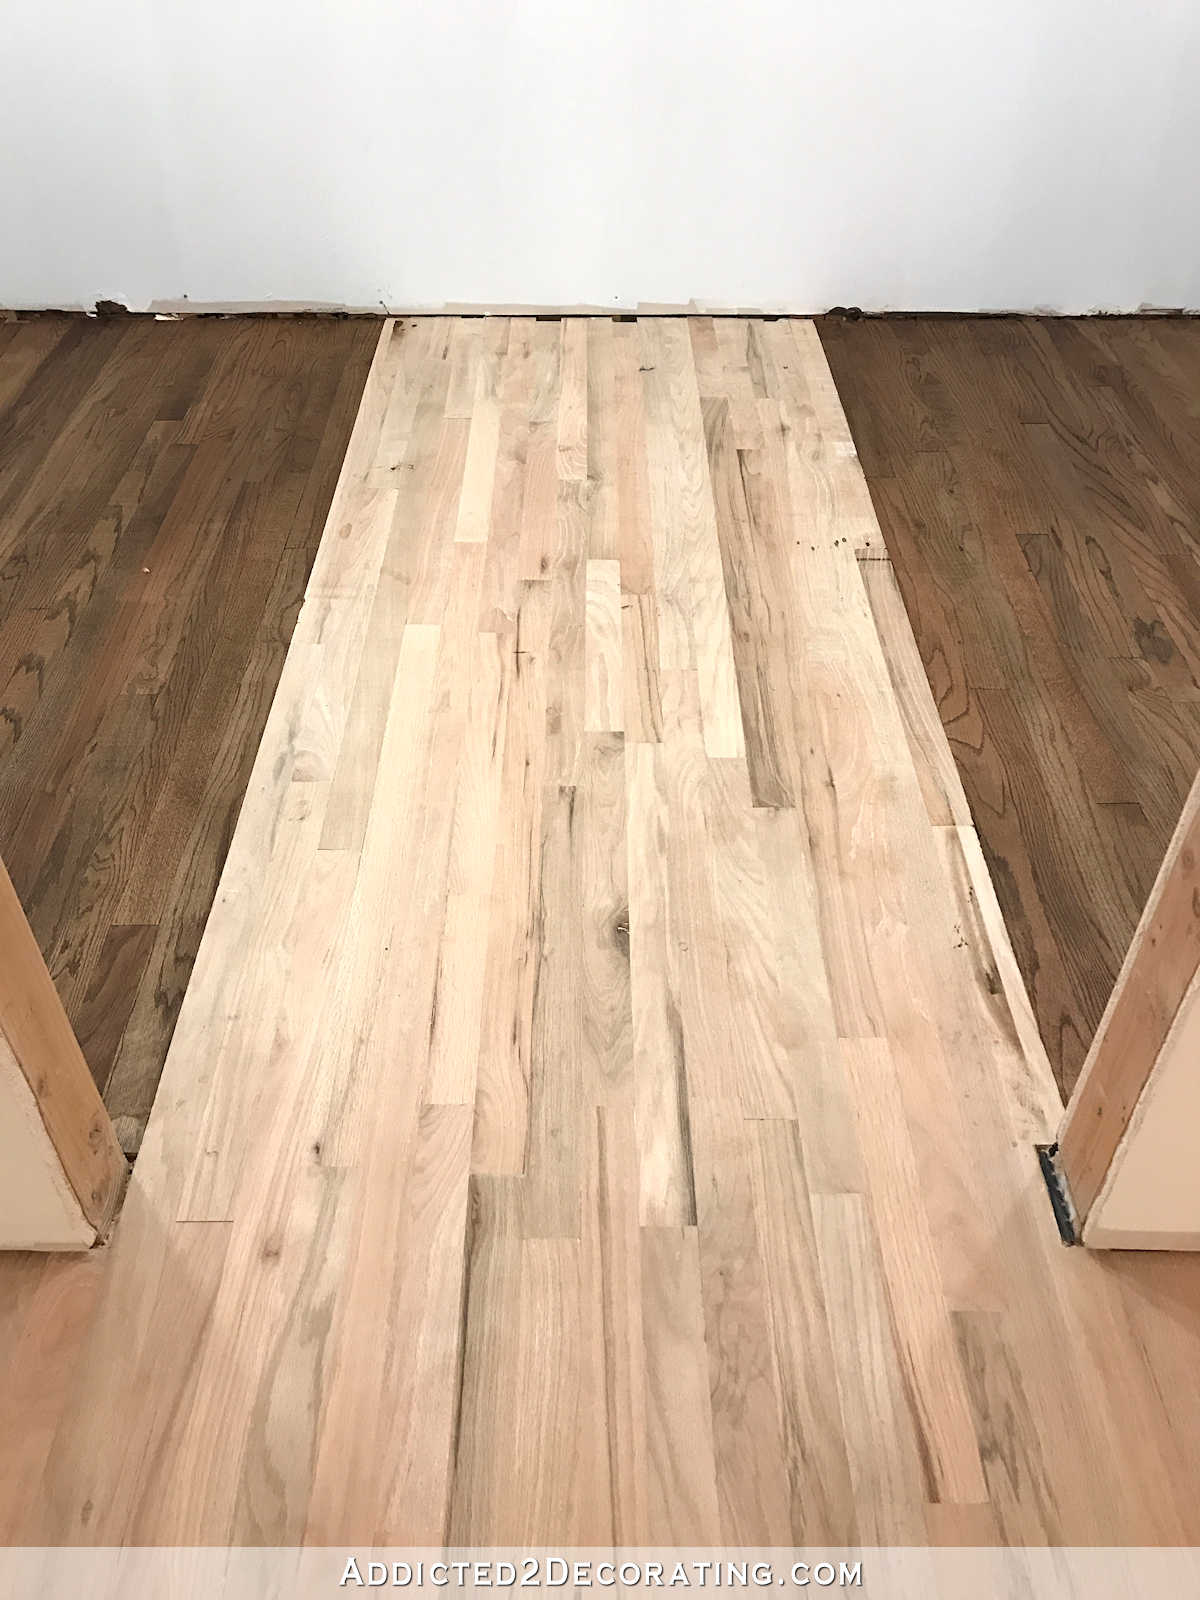 How To Change Color Of Hardwood Floors Without Sanding